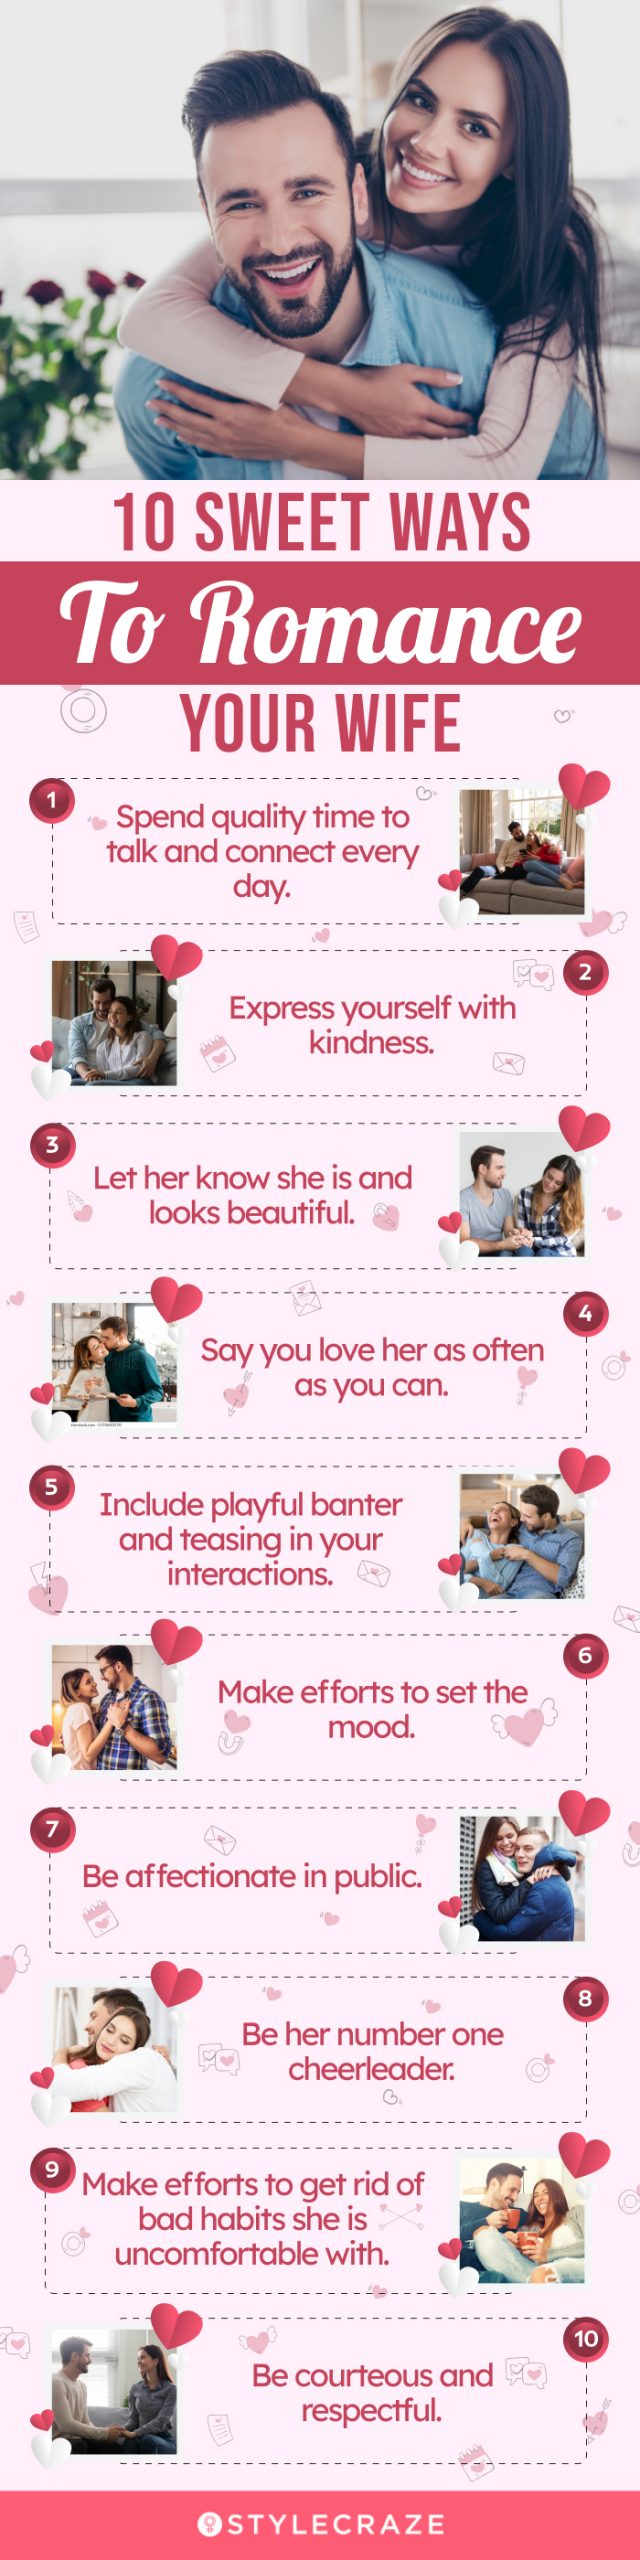 10 sweet ways to romance your wife (infographic)